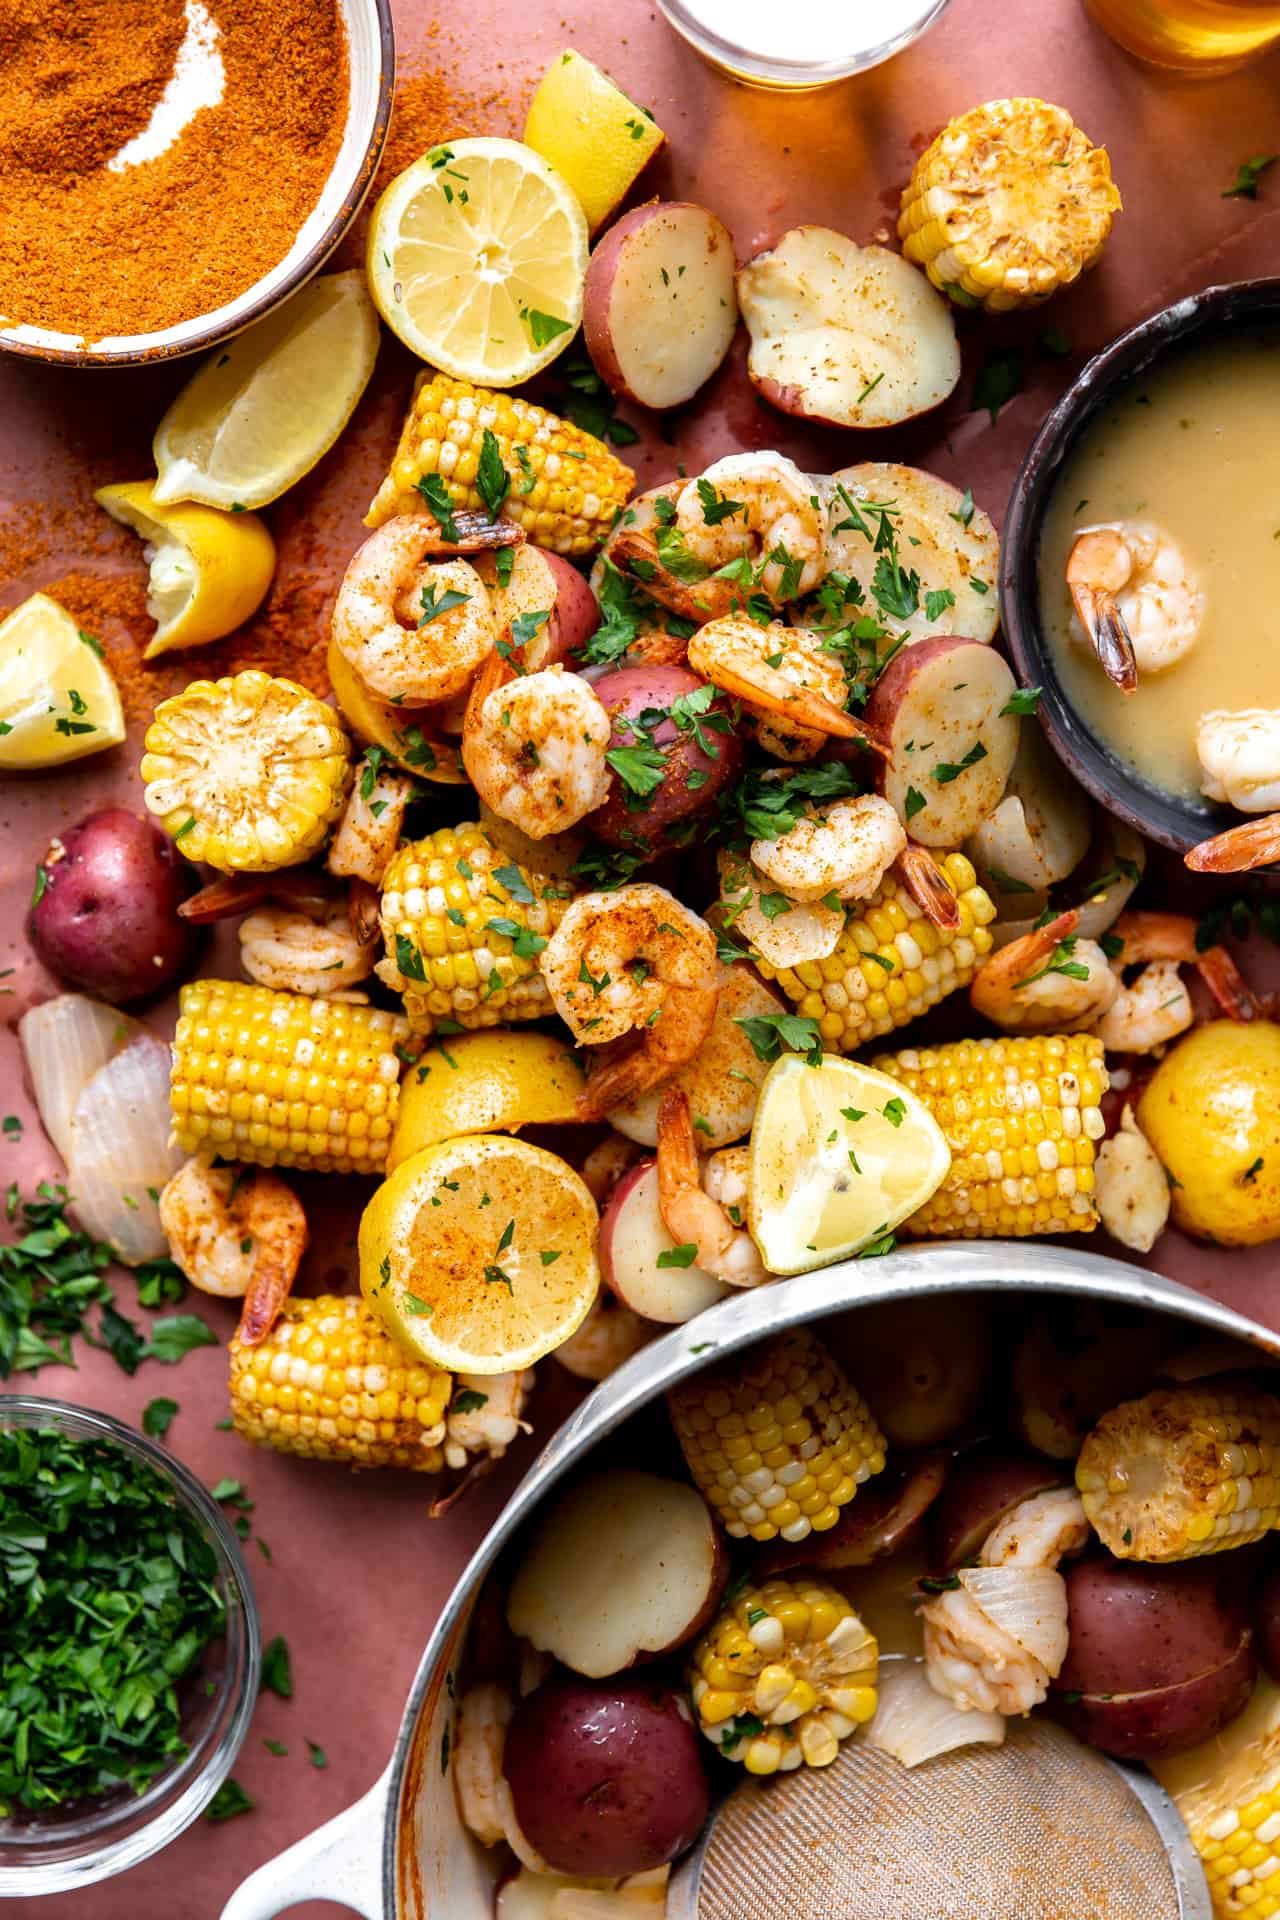 Shrimp boil spread out on butcher paper, with a side of old bay seasoning, beer and garlic butter.